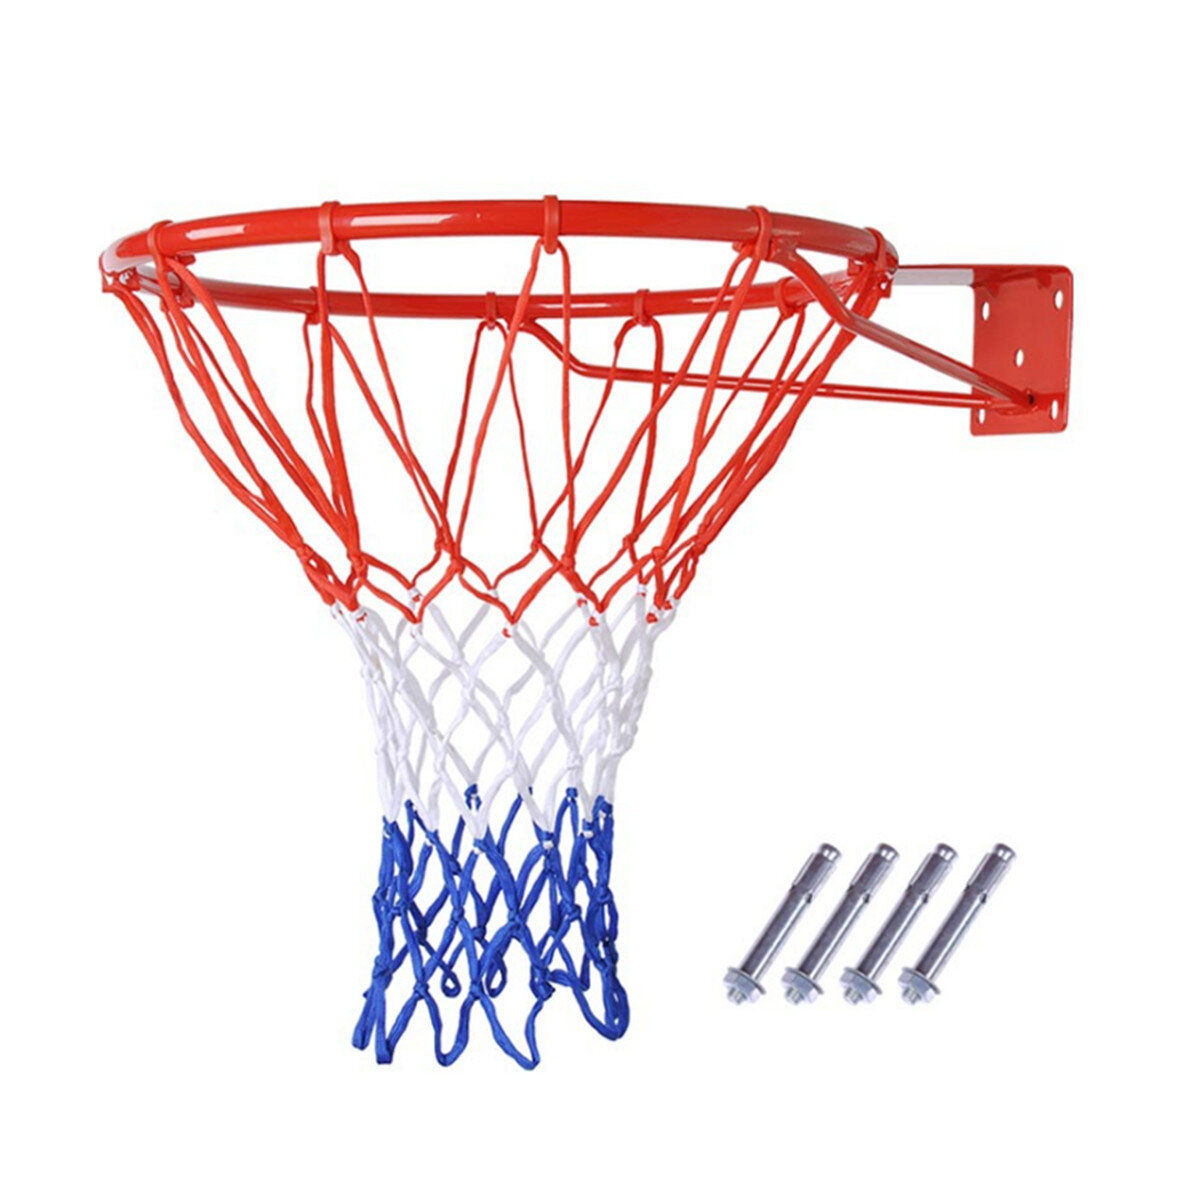 Wasco RING-112A Crown Legend Basketball Ring Diameter 46 cm with Net &  Screw/Bolts Ball Size 7, Multicolor : Amazon.in: Sports, Fitness & Outdoors